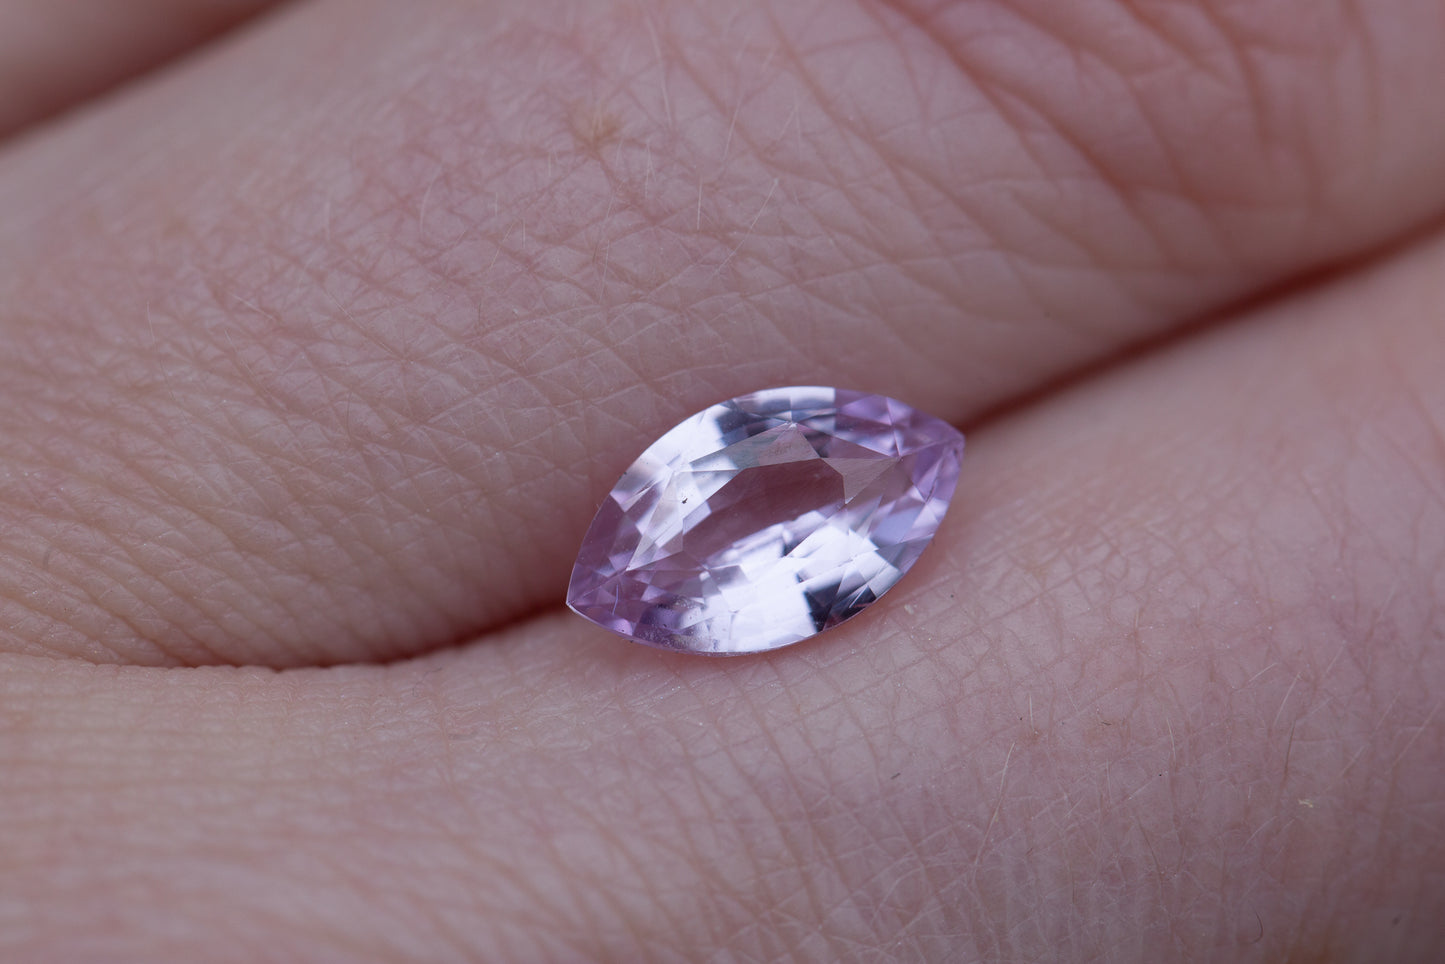 1.7ct marquise pink lavender sapphire